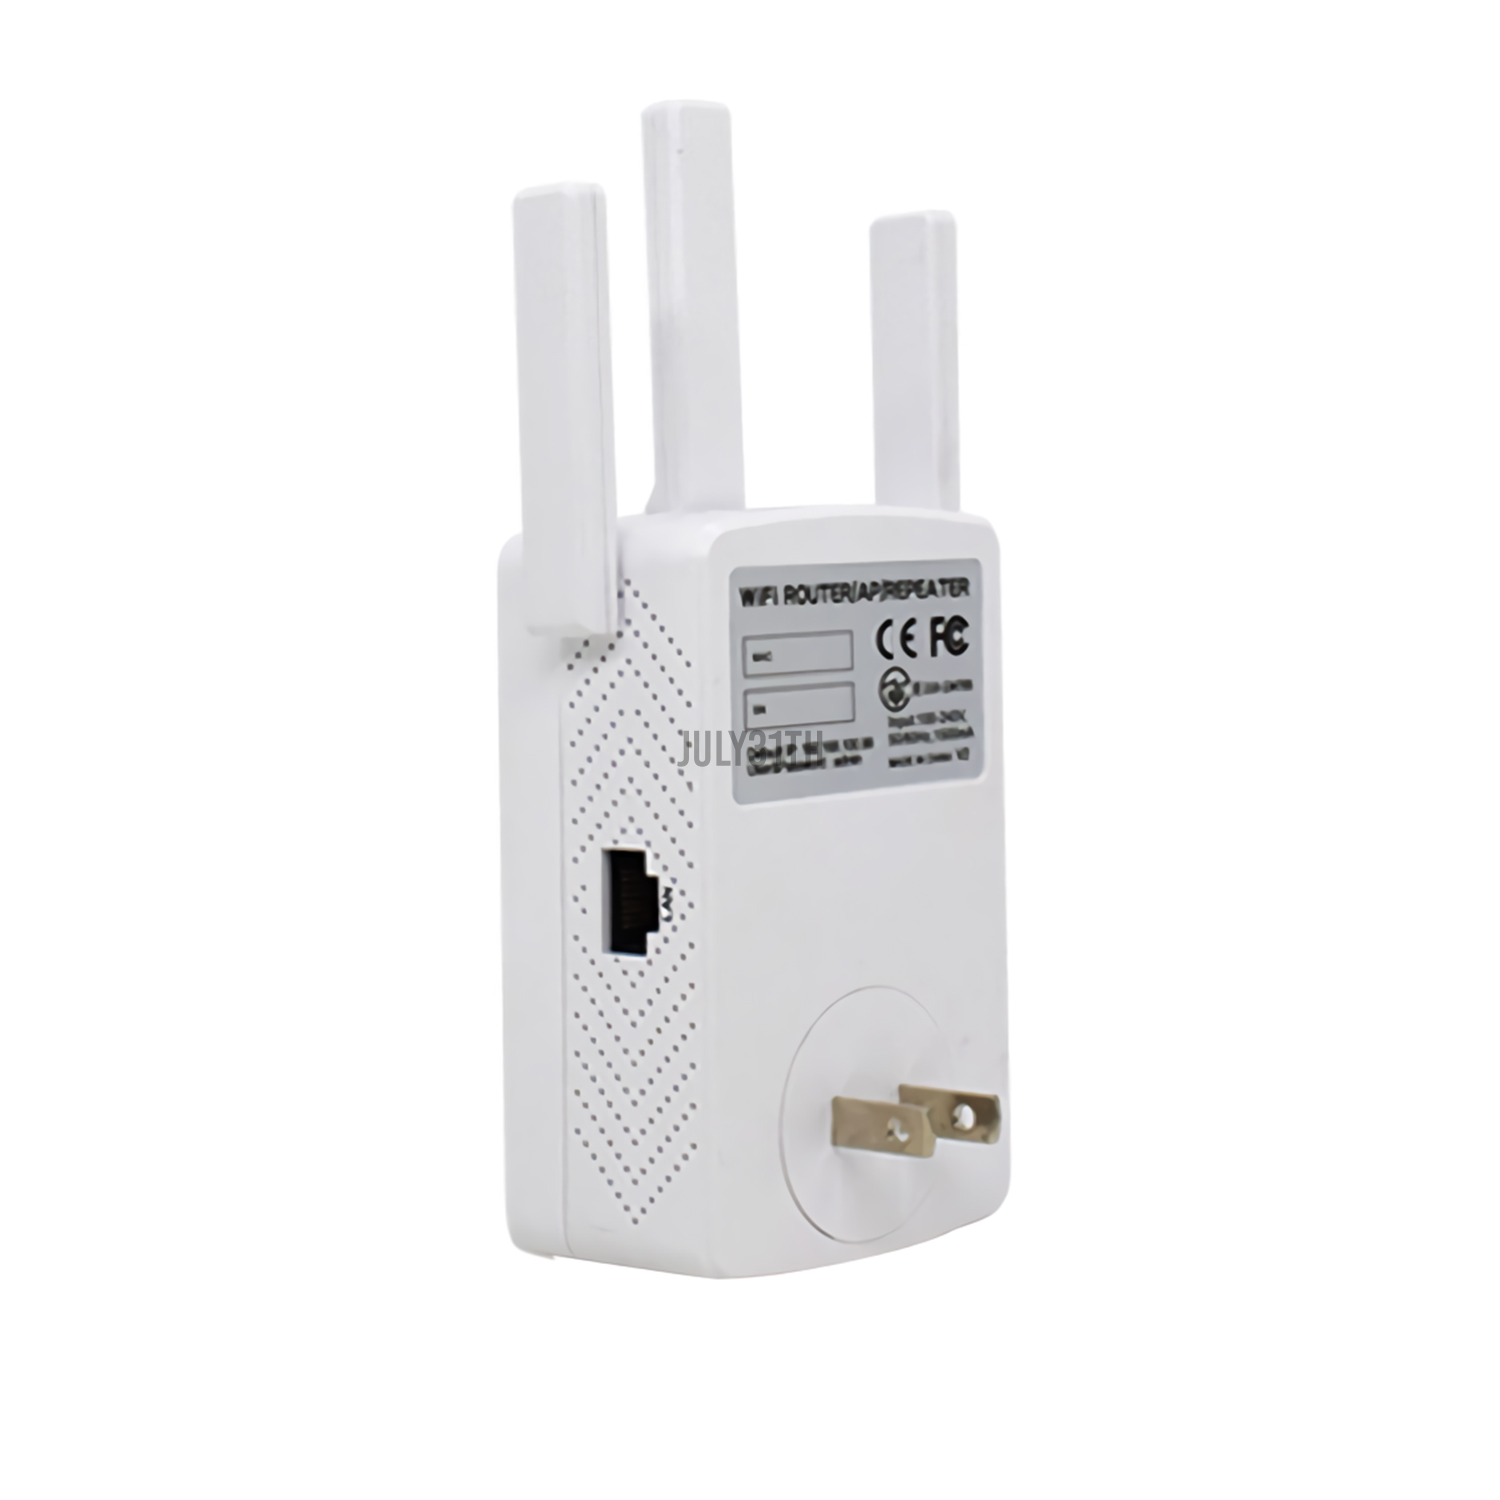 AC 1200M Dual Band Wireless AP Repeater WiF1 Signal Amplifier 2.4GHz 5GHz Router Range Extender WiF1 Booster